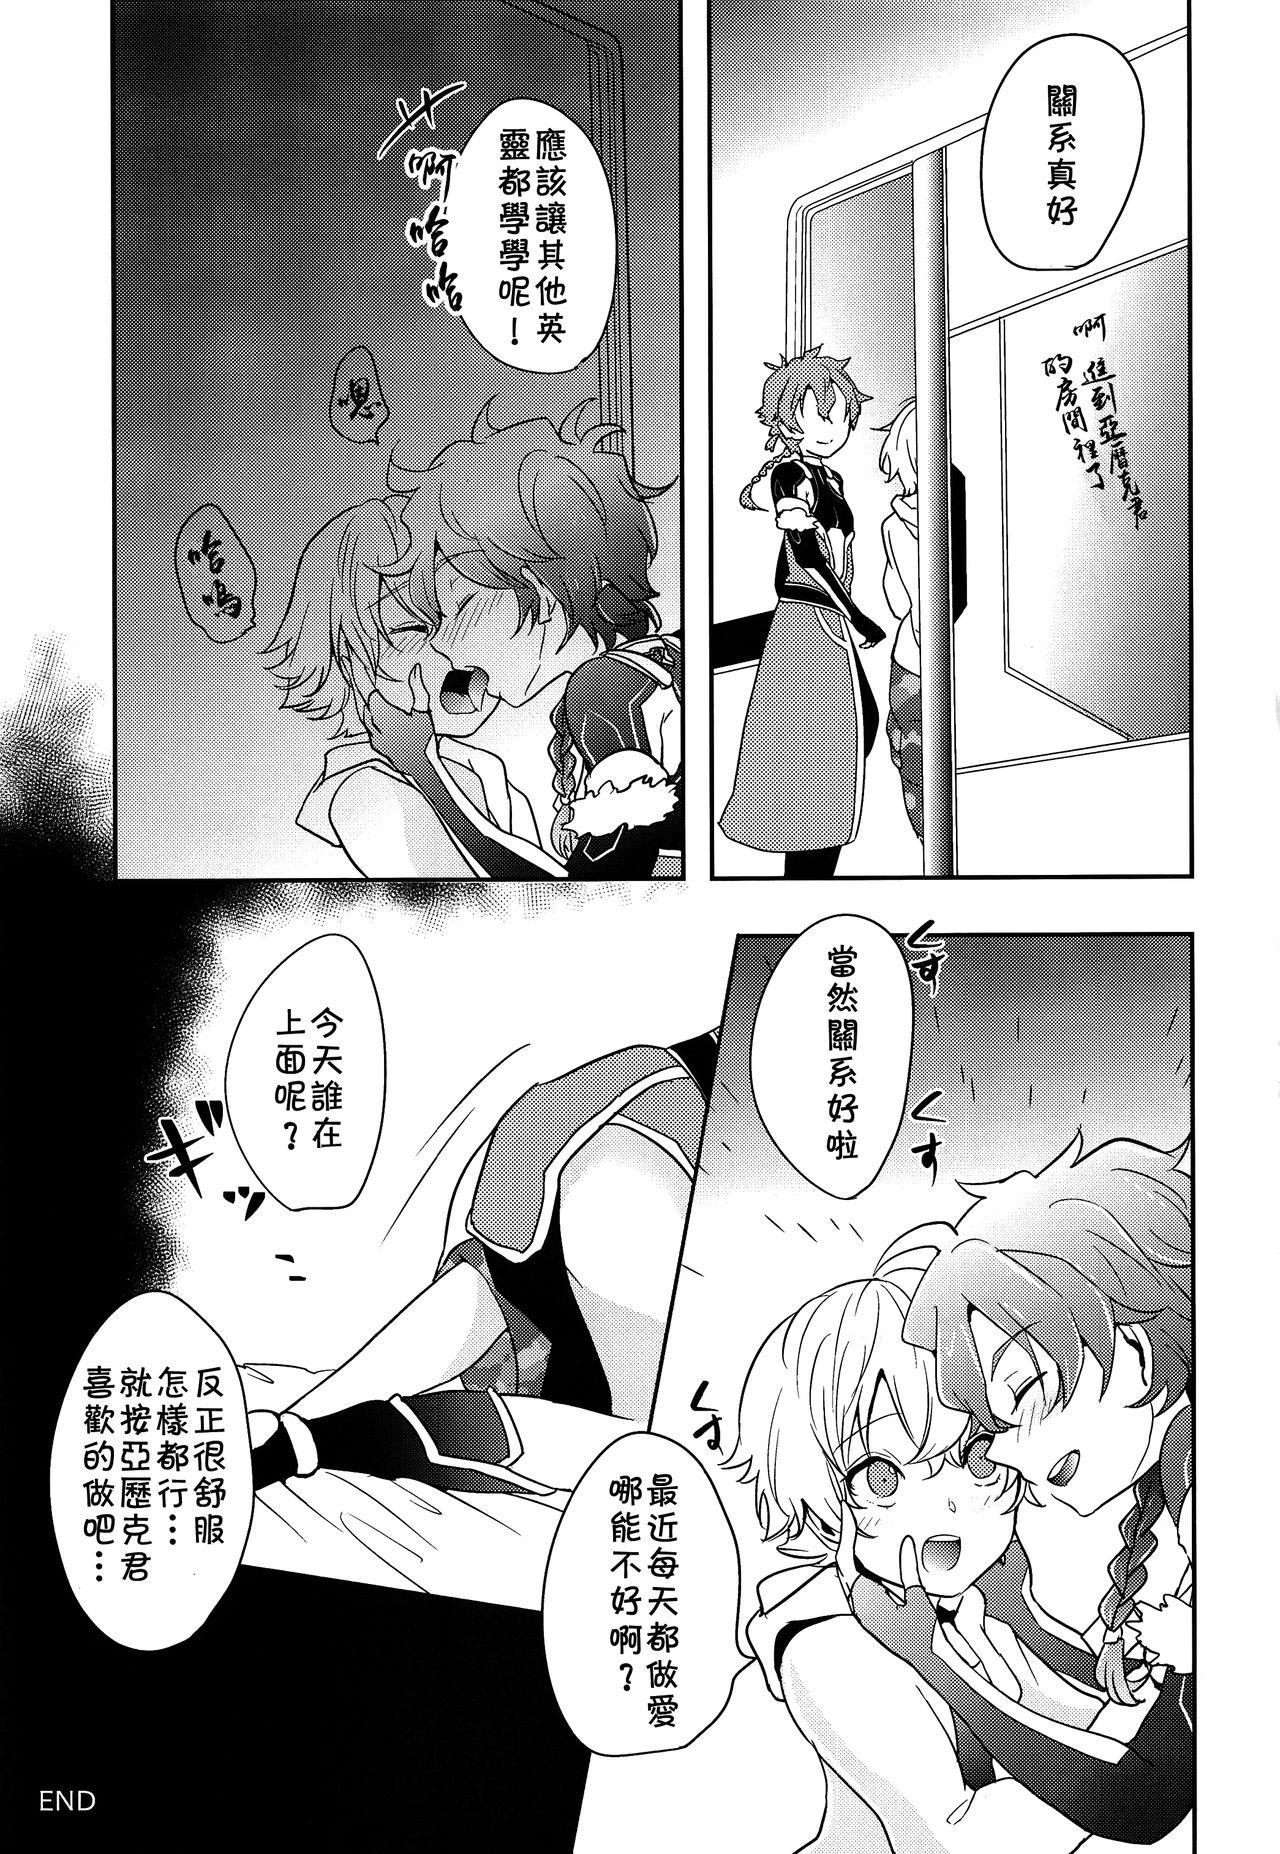 Transsexual Ko-Gil Challenge - Fate grand order Boss - Page 40